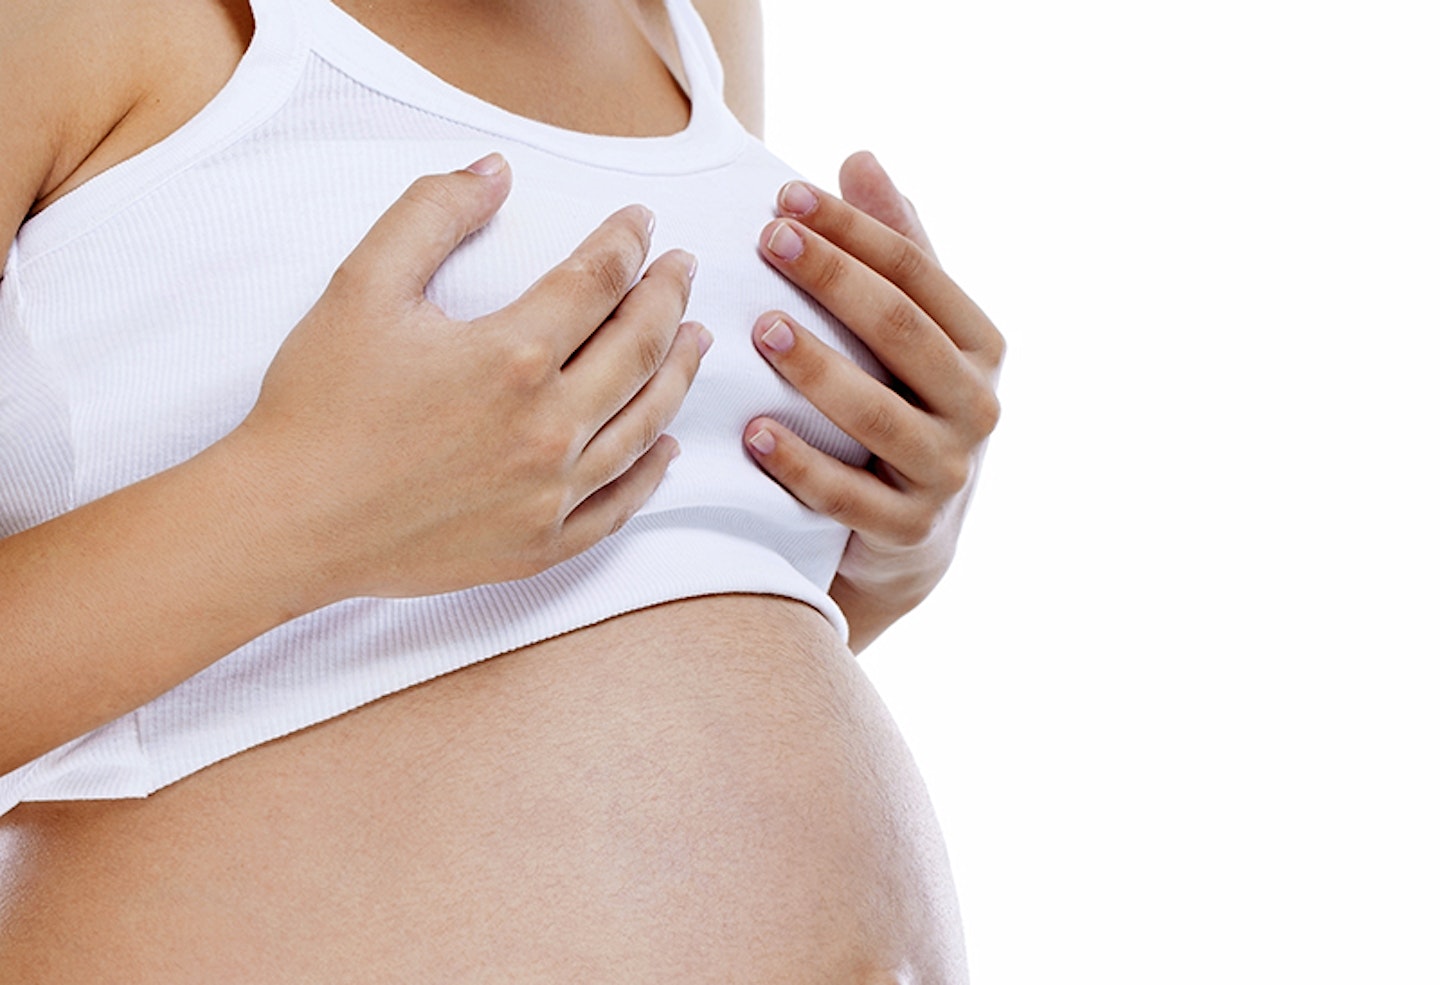 Sore breasts in pregnancy: Tender breasts in early pregnancy and